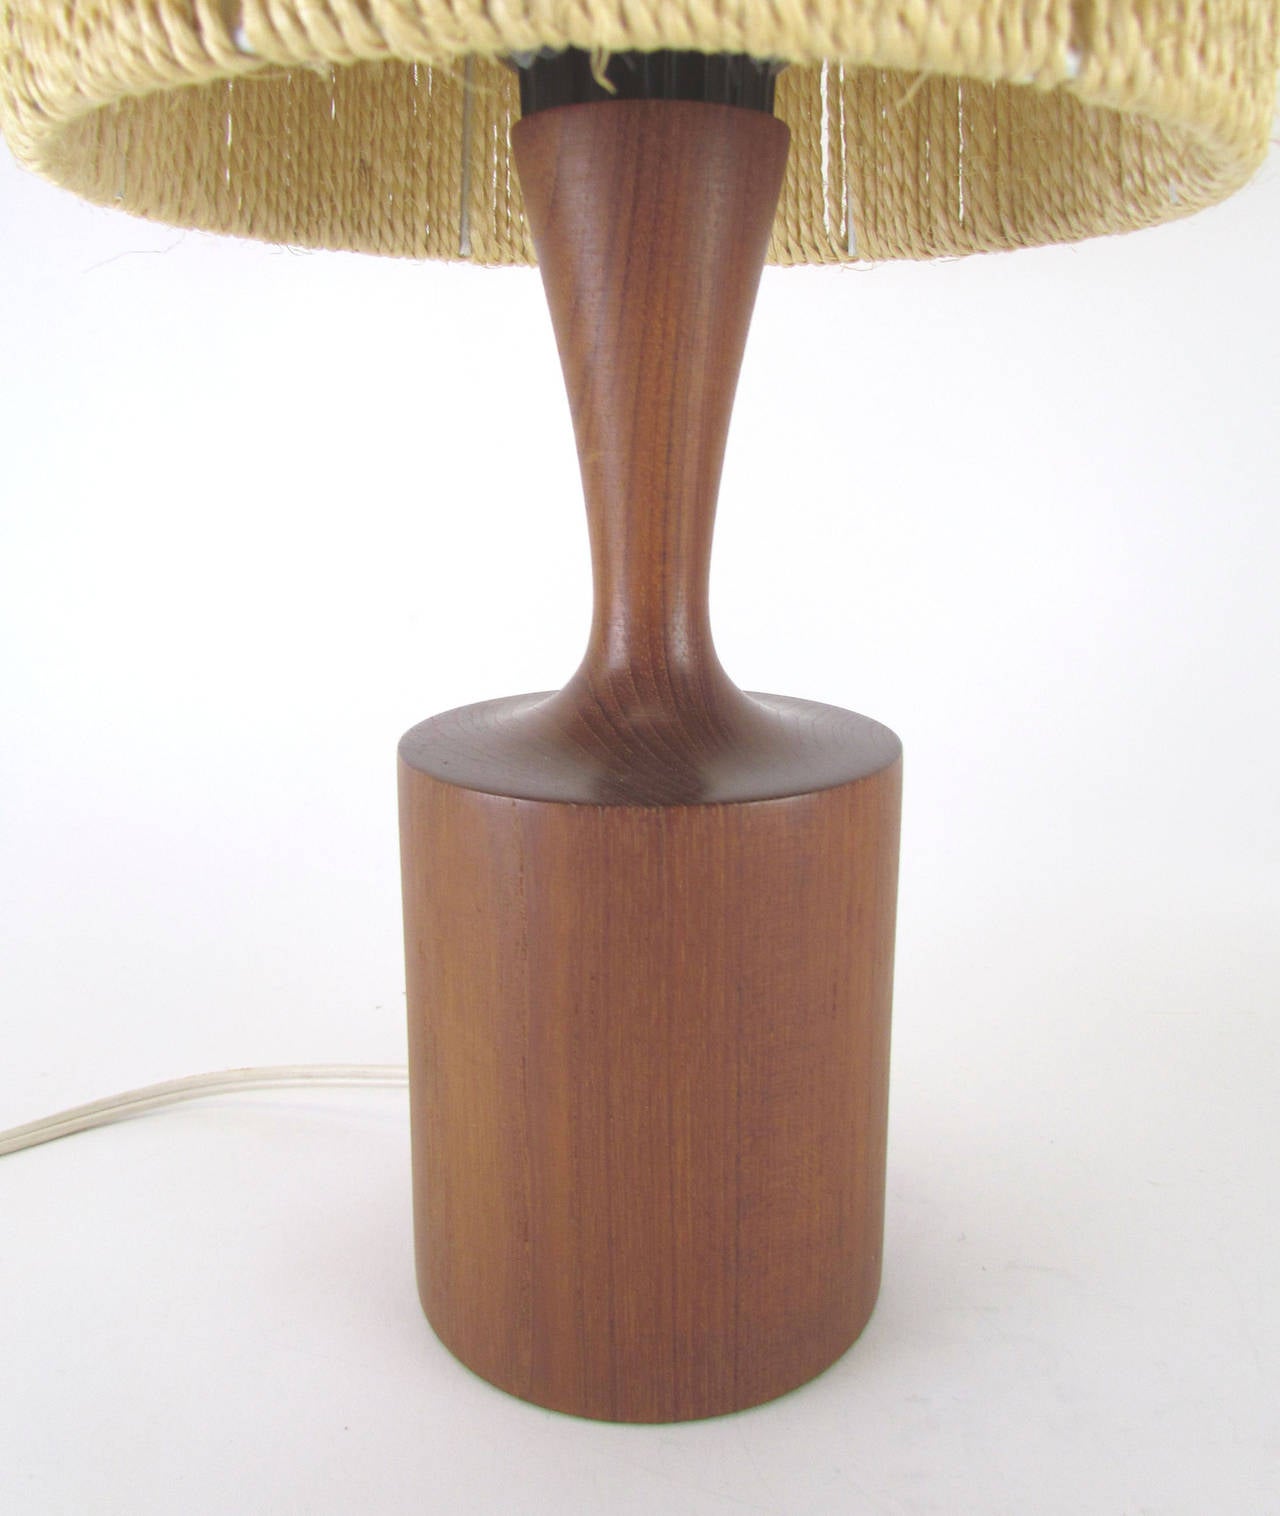 Accent table lamp with original jute cord shade and solid carved teak base by Danish lighting company Fog & Mørup, circa 1960s.

15.75